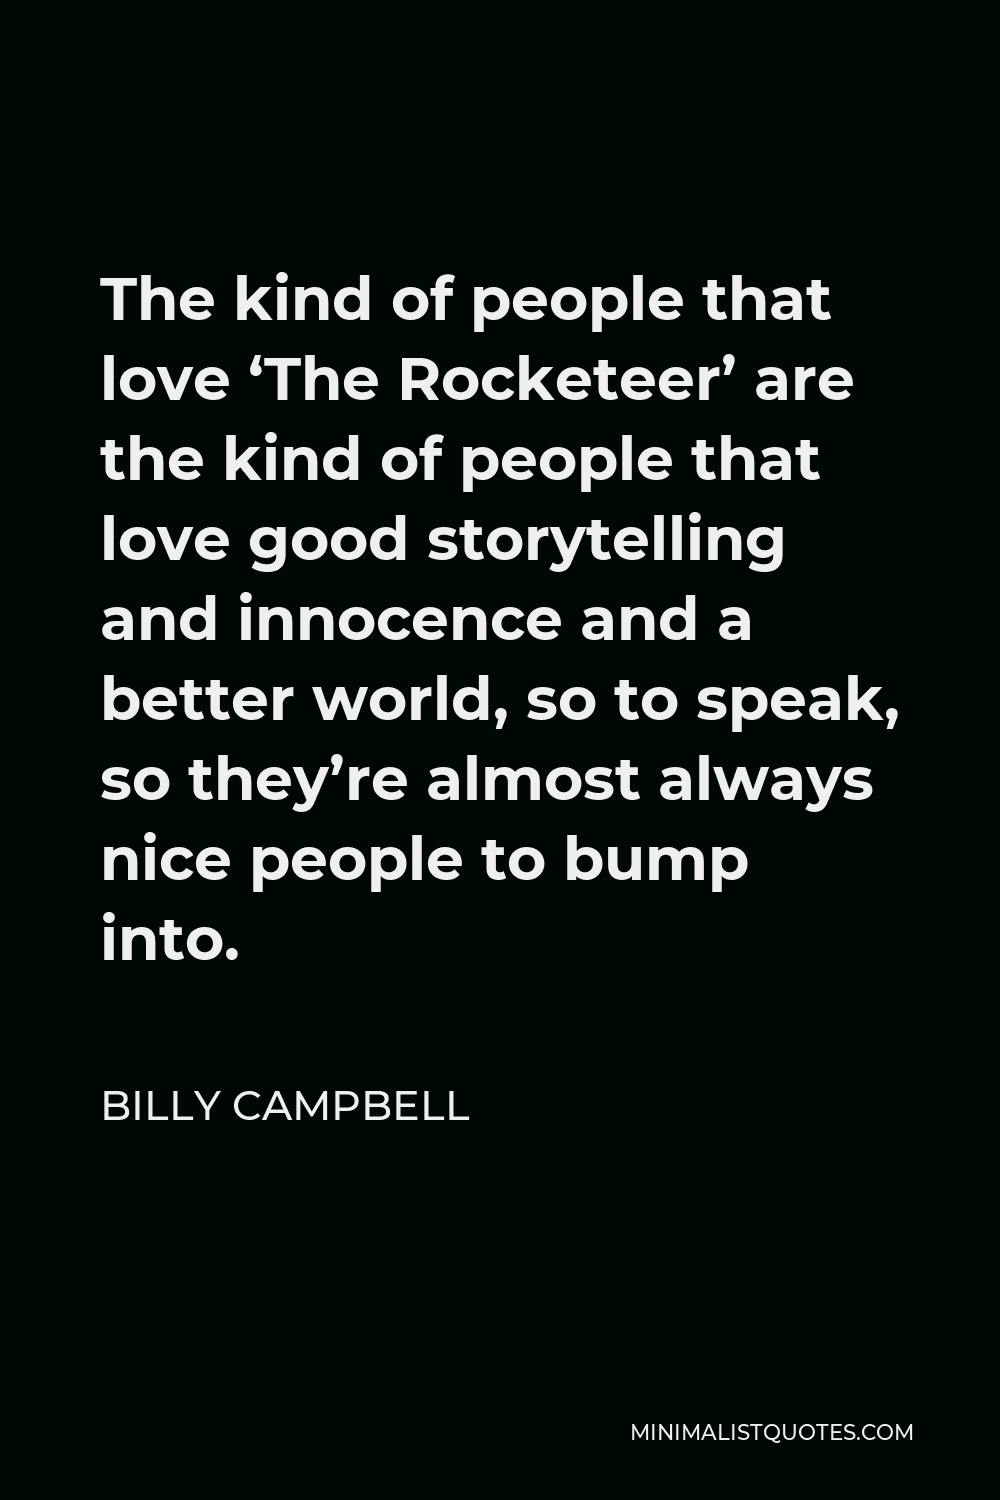 Billy Campbell Quote - The kind of people that love ‘The Rocketeer’ are the kind of people that love good storytelling and innocence and a better world, so to speak, so they’re almost always nice people to bump into.